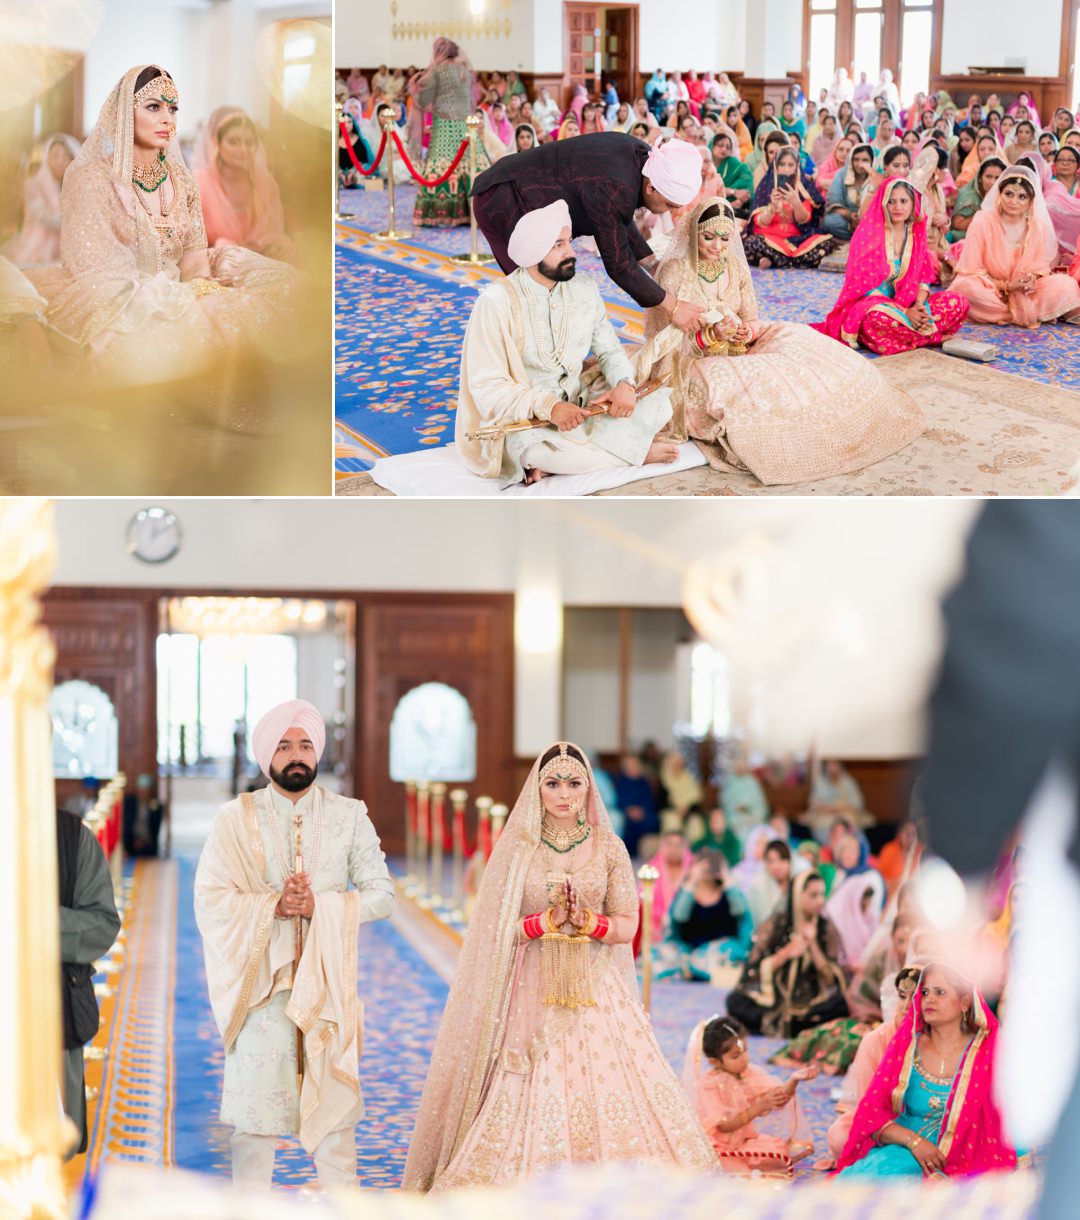 The bride's father hands over the groom's palla during the Sikh wedding 